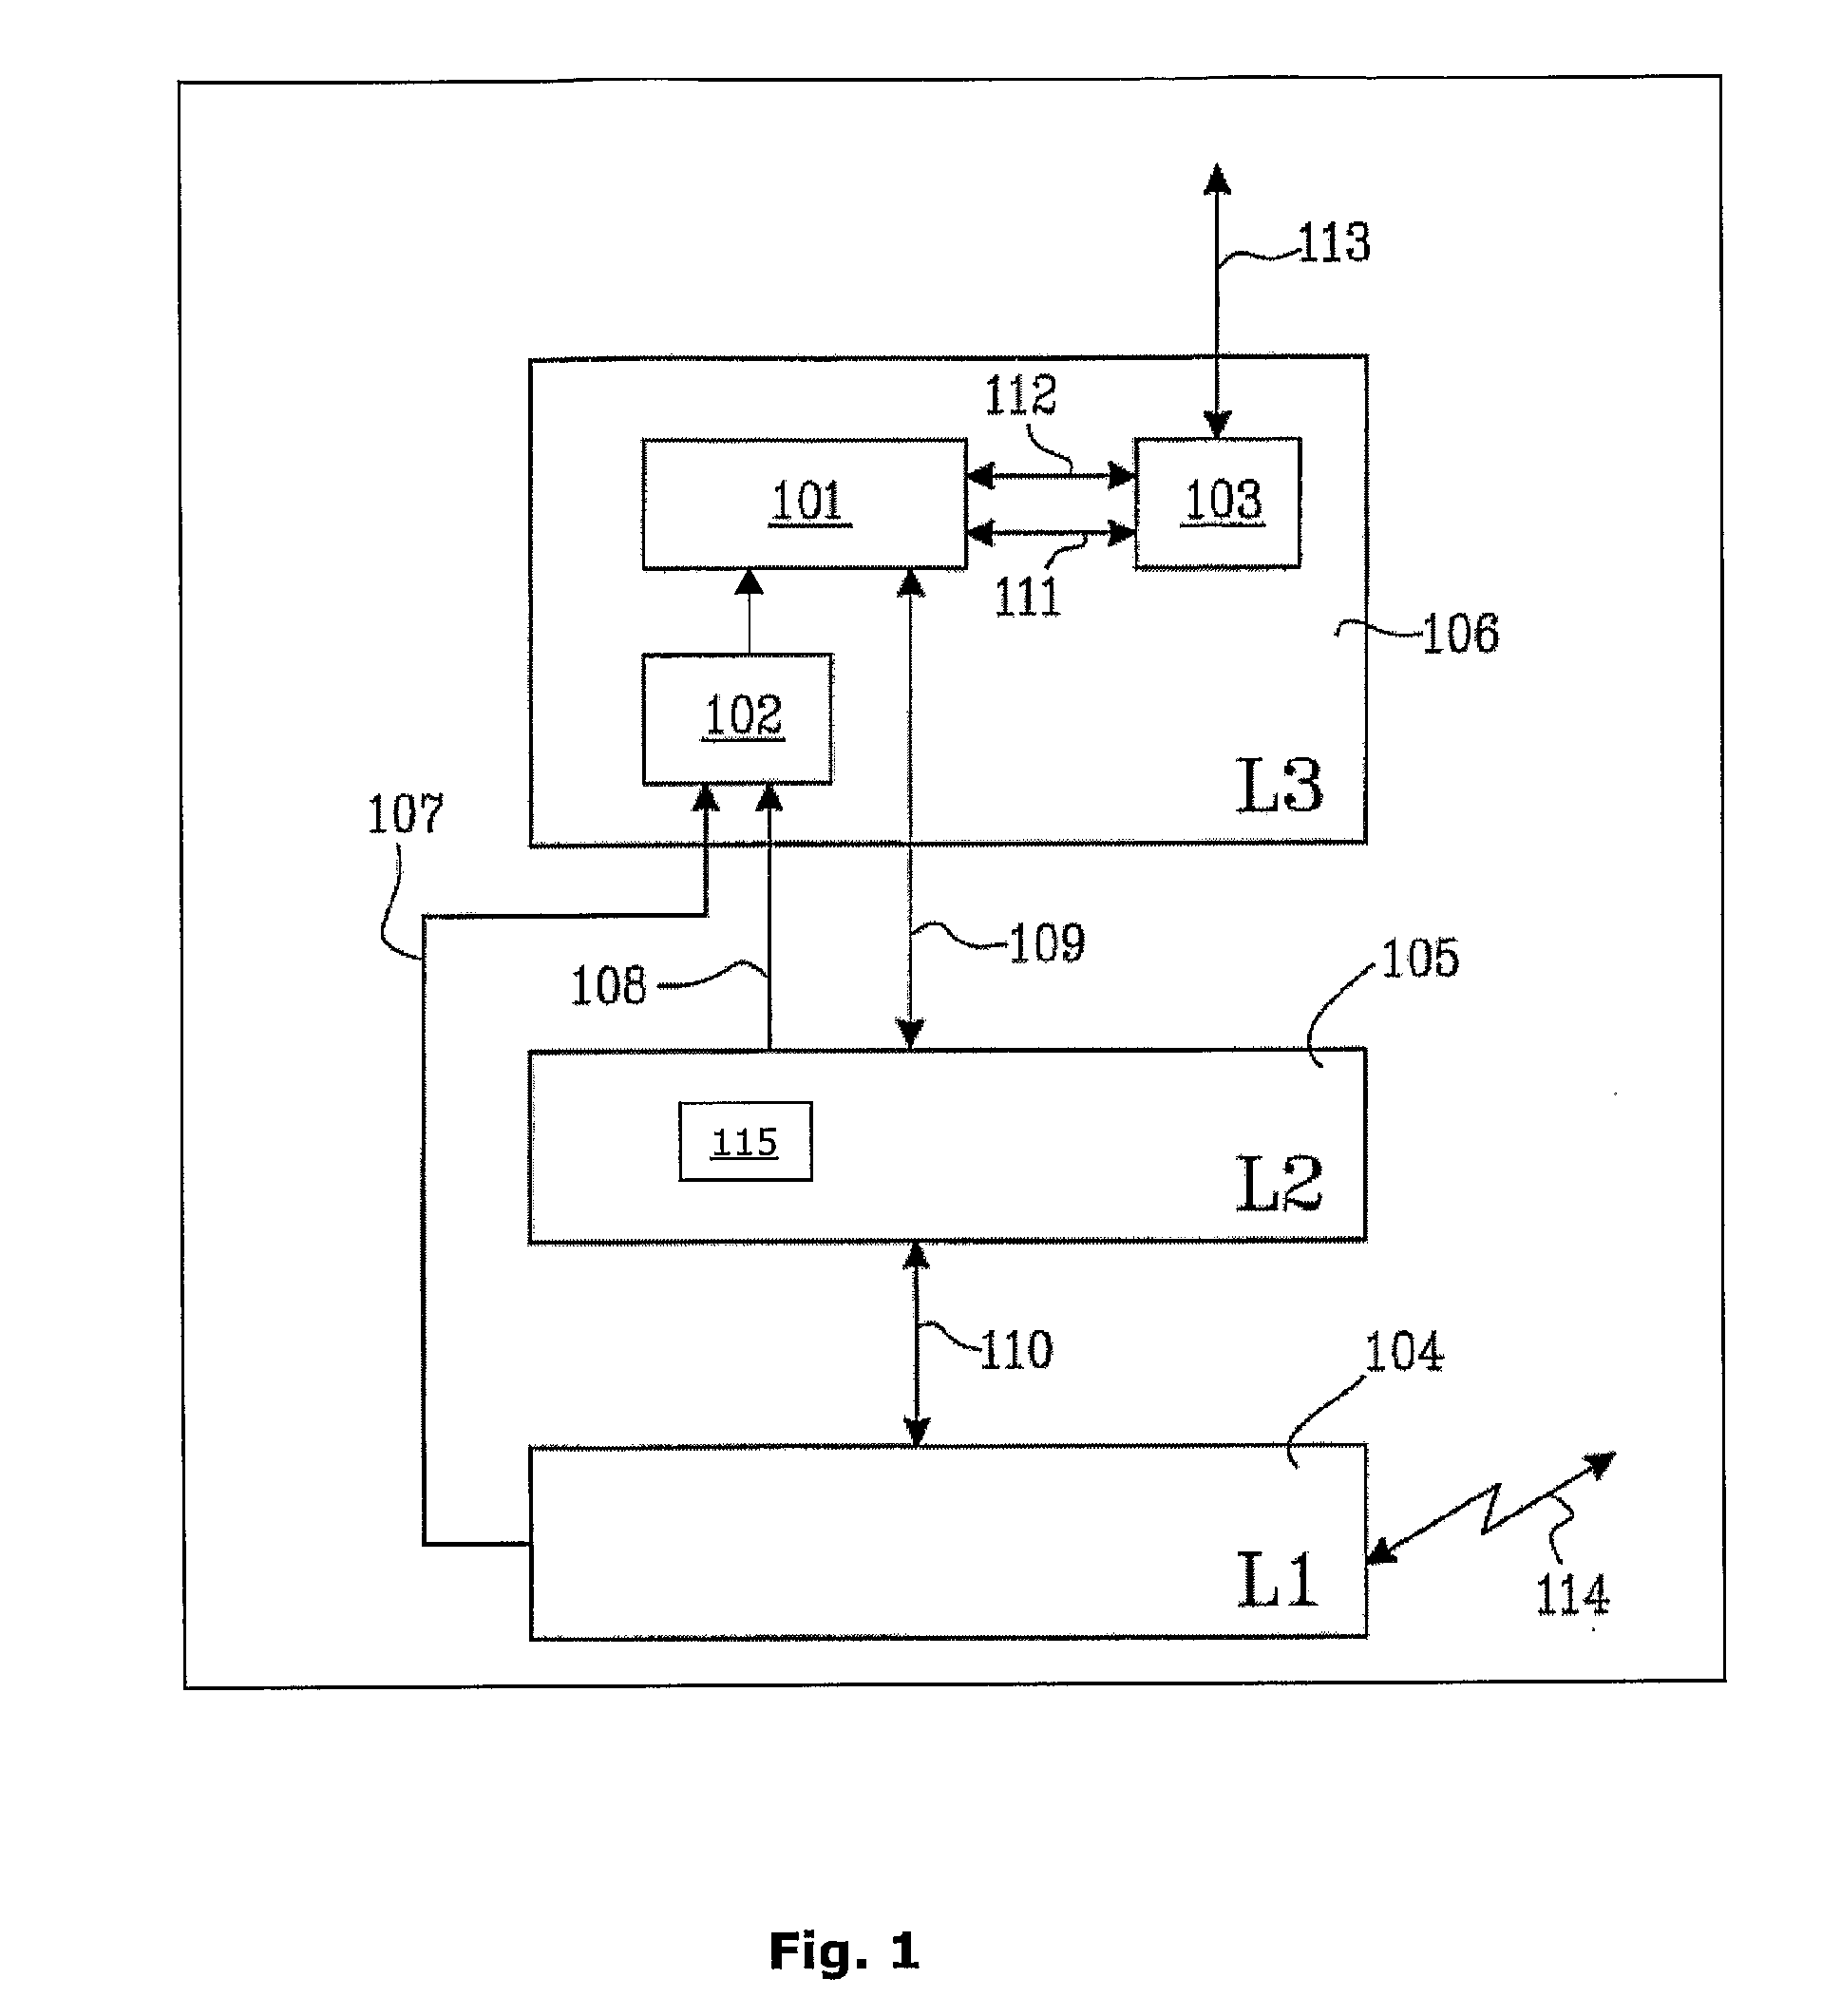 Method and System for Efficient Routing in Ad Hoc Networks